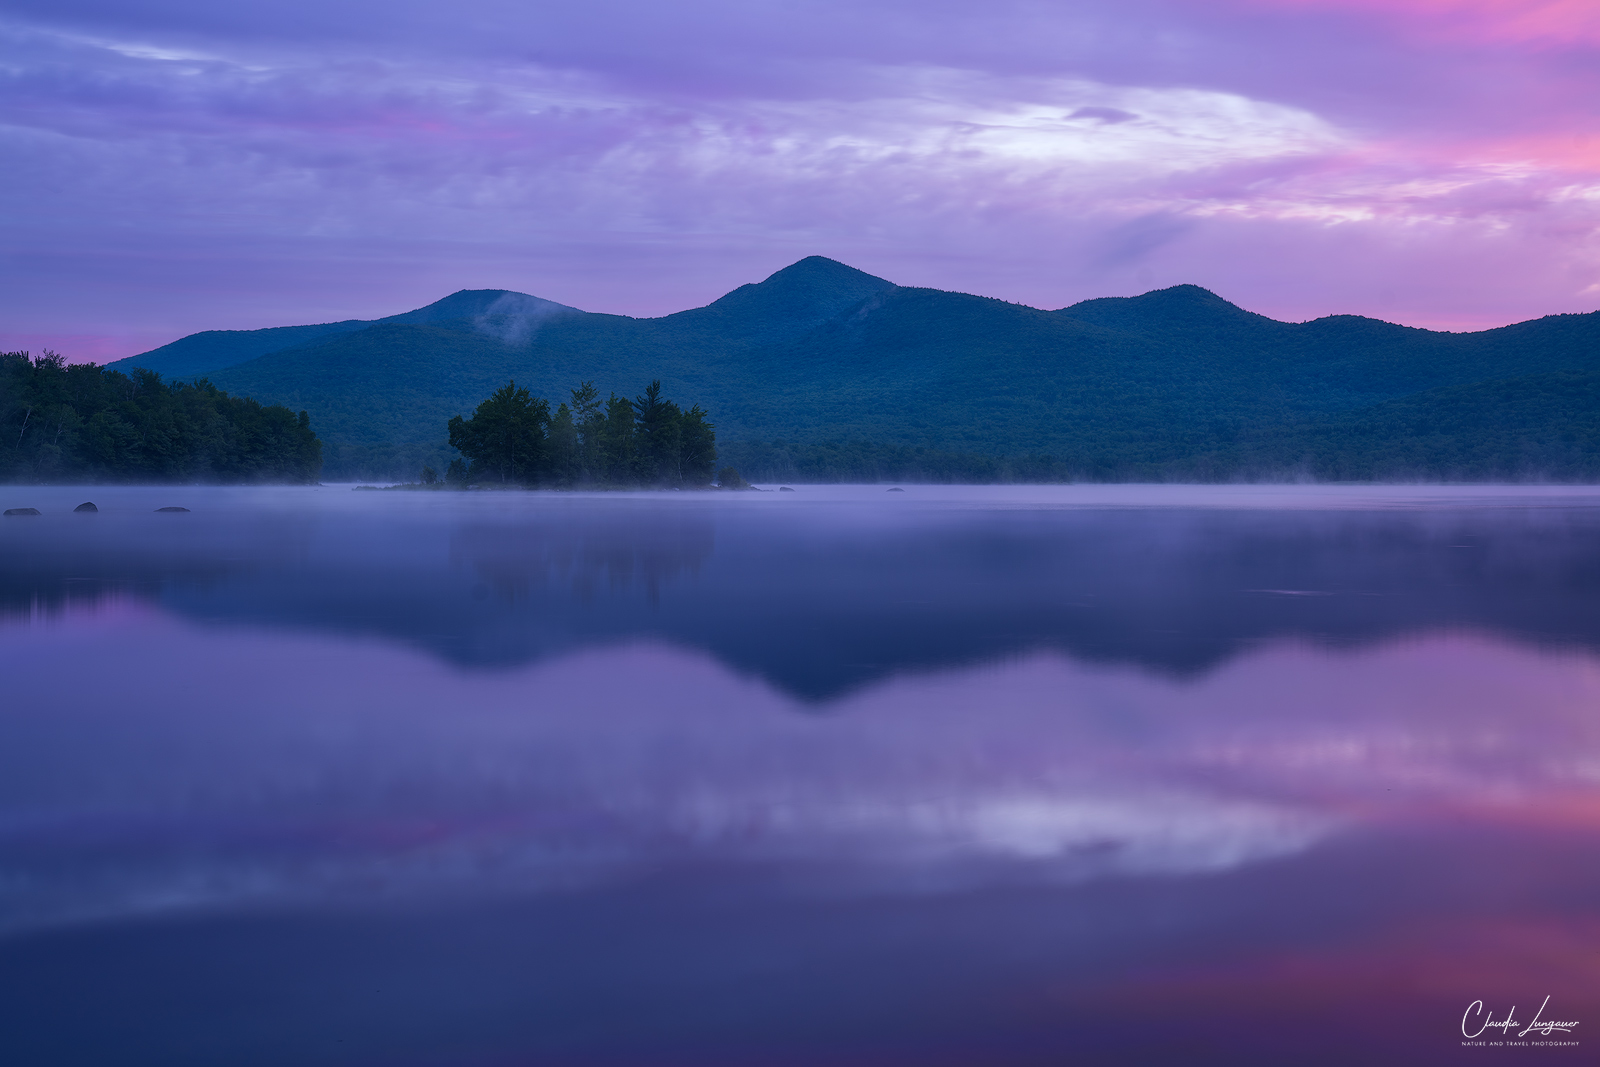 Colorful sunrise with mist and fog at Leffert's Pond in Vermont.